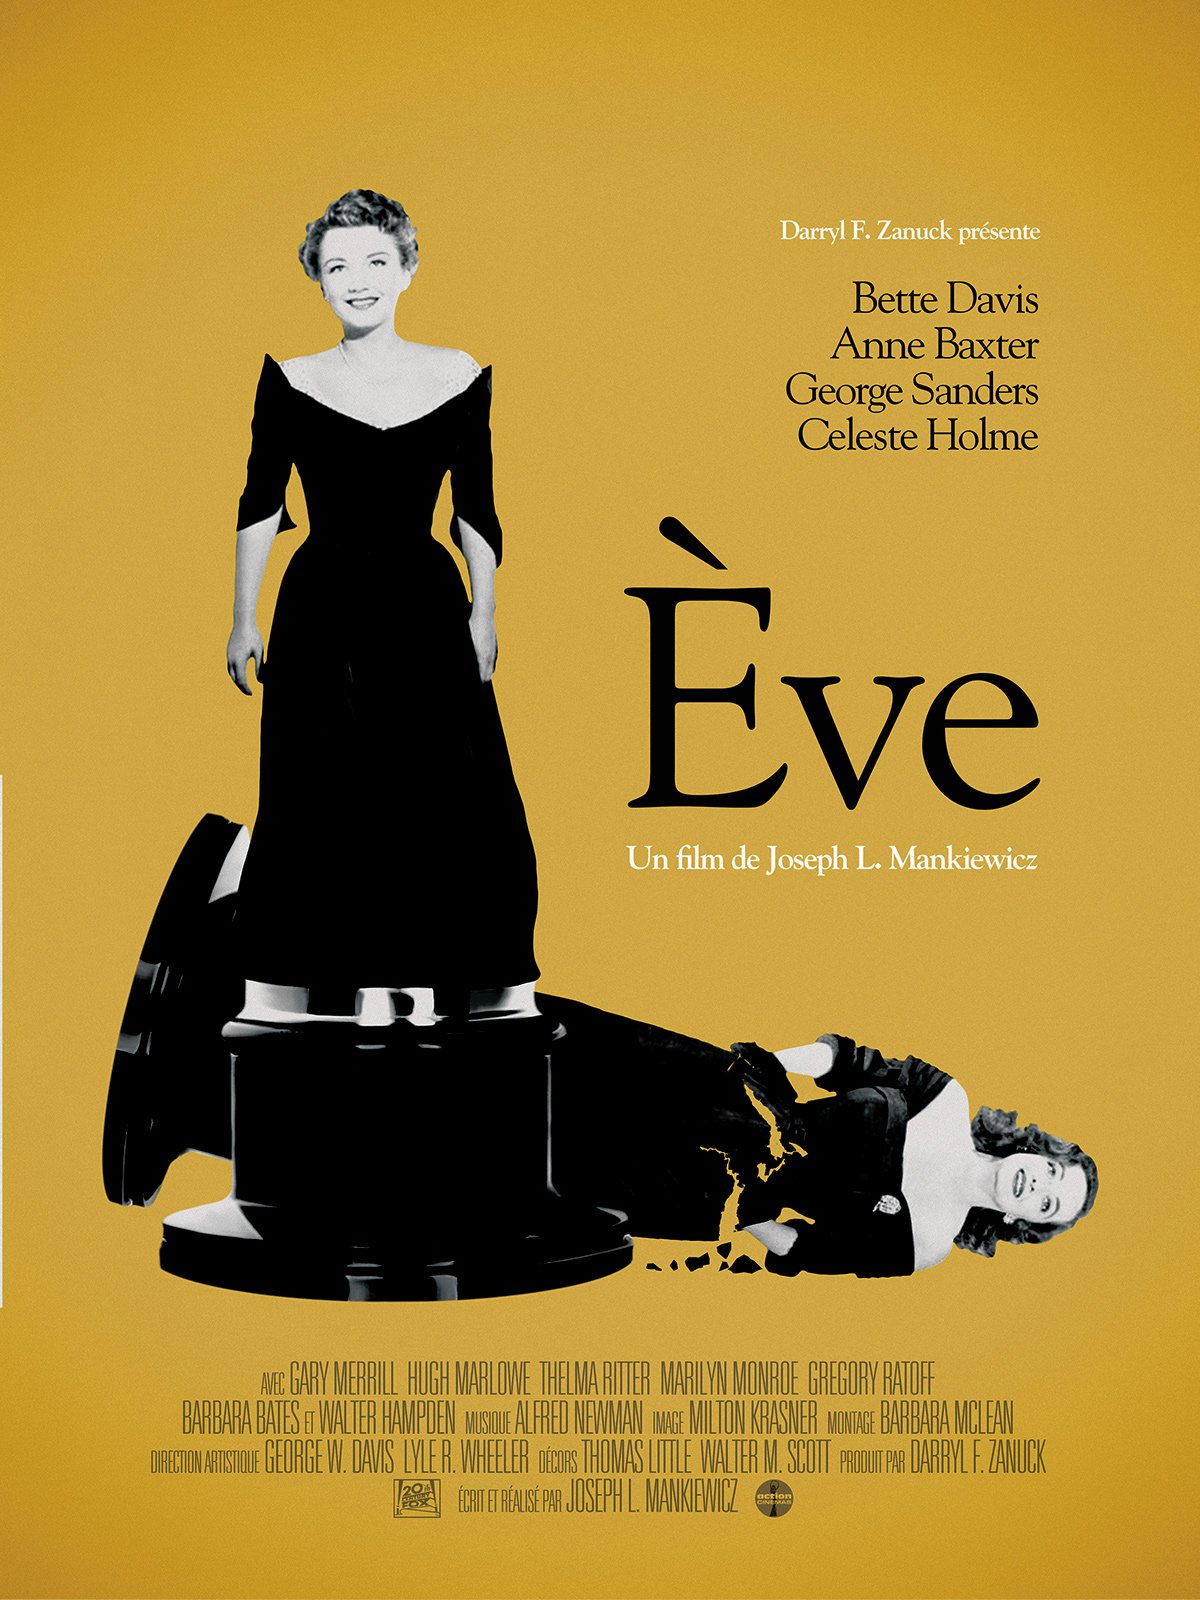 Eve en Blu Ray : All About Eve Blu-ray - AlloCiné